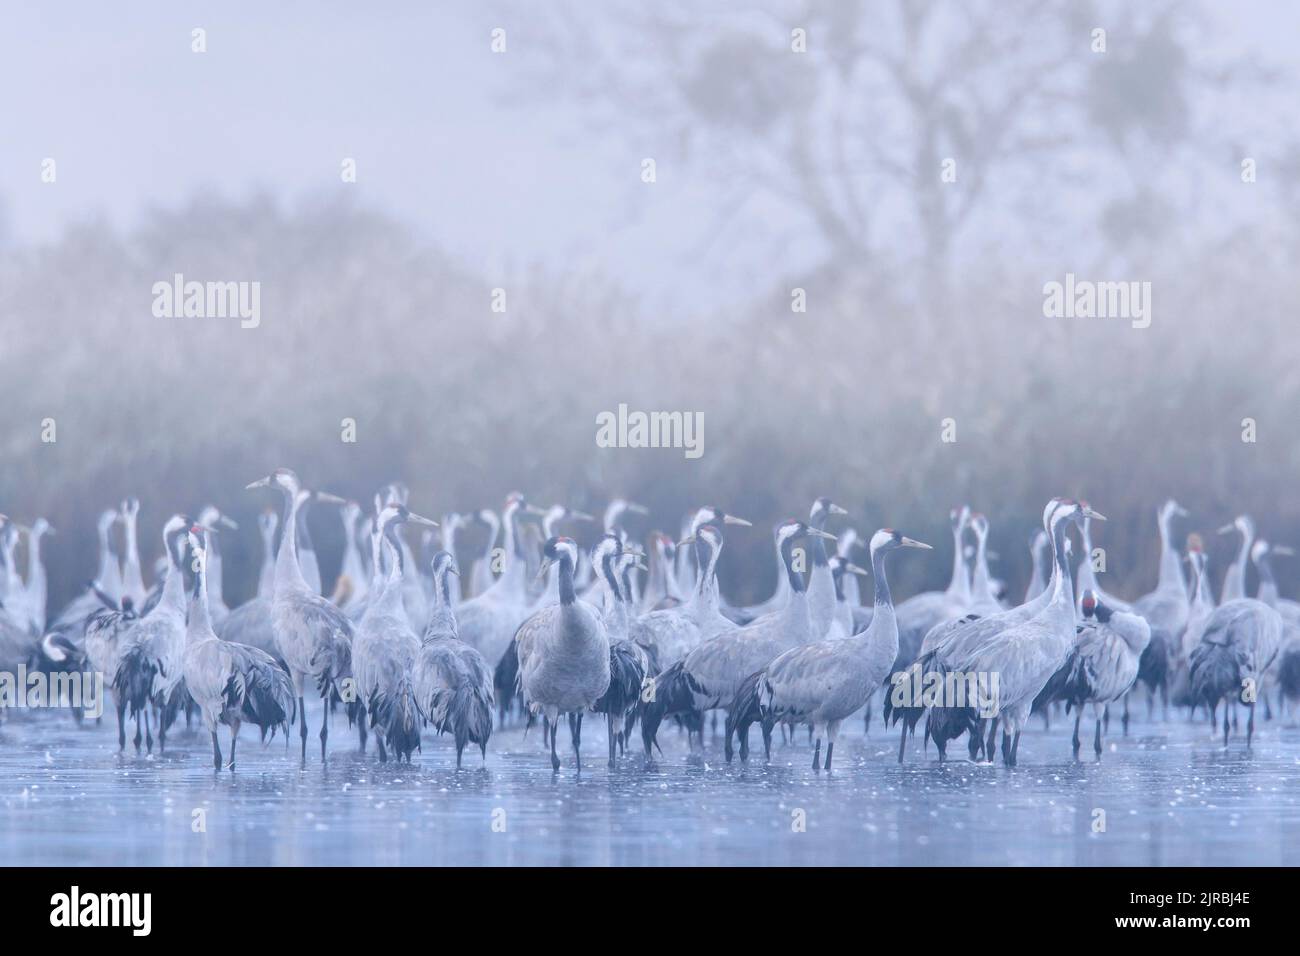 Flock of common cranes / Eurasian crane (Grus grus) group resting in shallow water at roosting site covered in early morning mist in autumn / fall Stock Photo